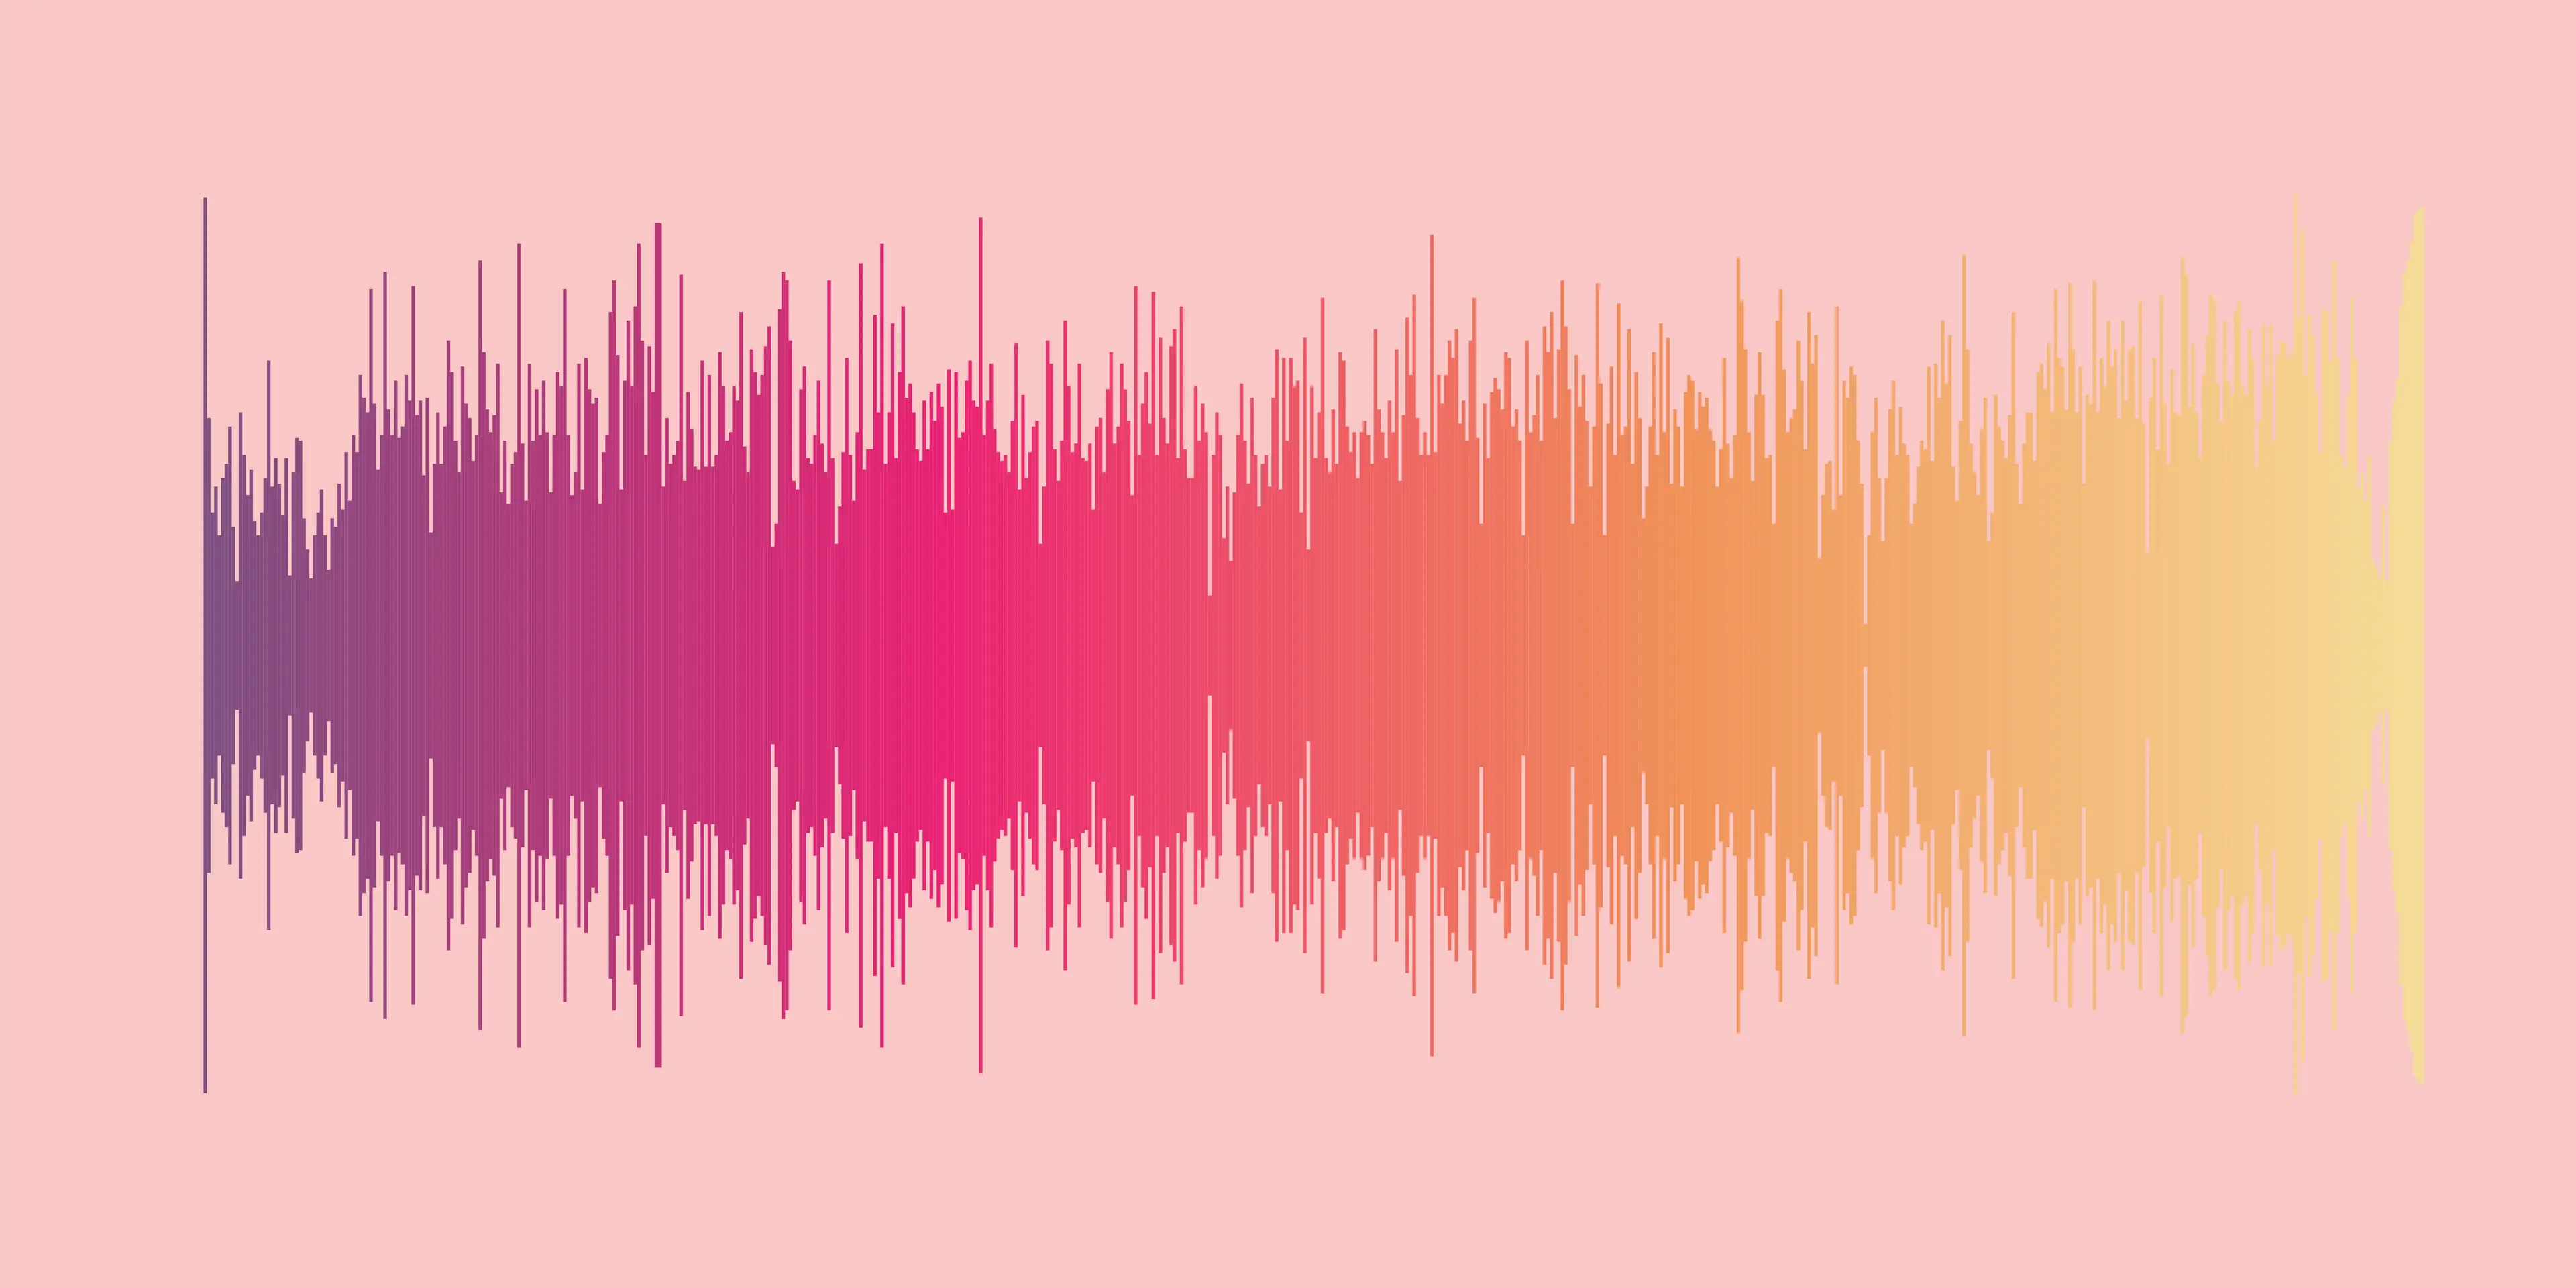 How to Generate a Sound Wave Art